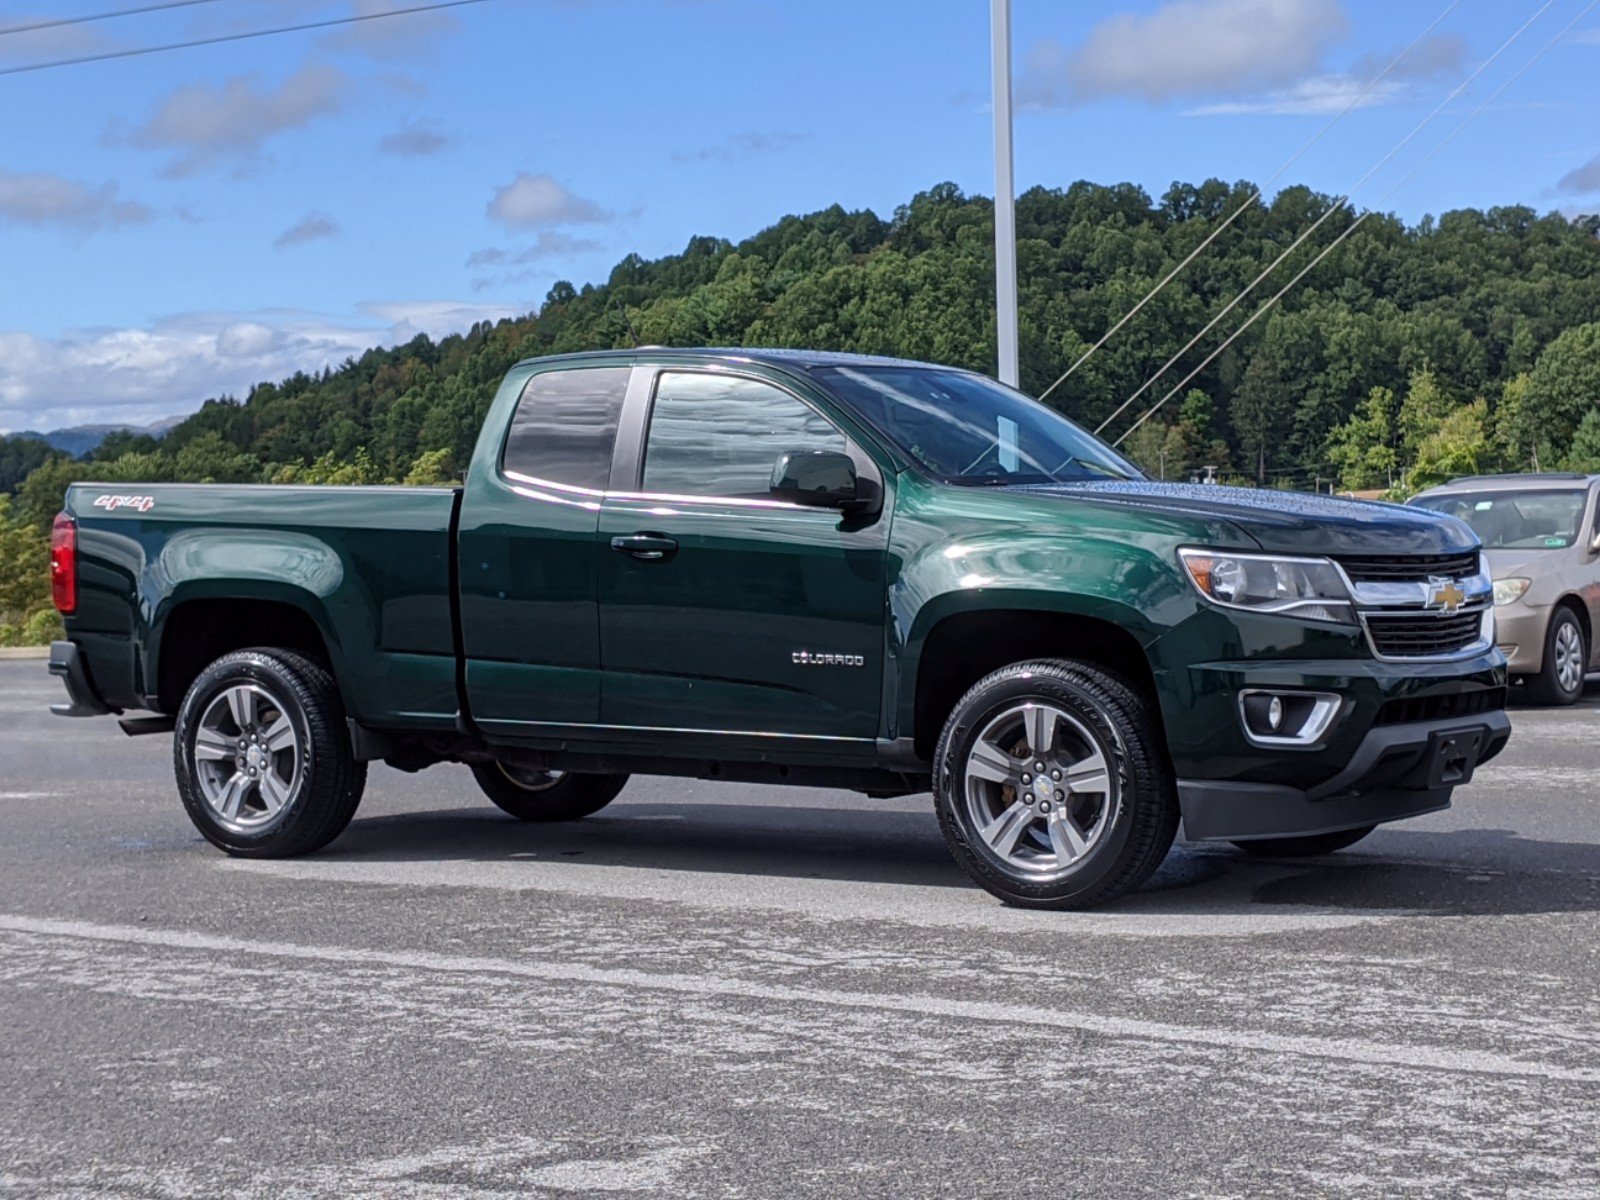 PreOwned 2015 Chevrolet Colorado 4WD LT 4WD Extended Cab Pickup